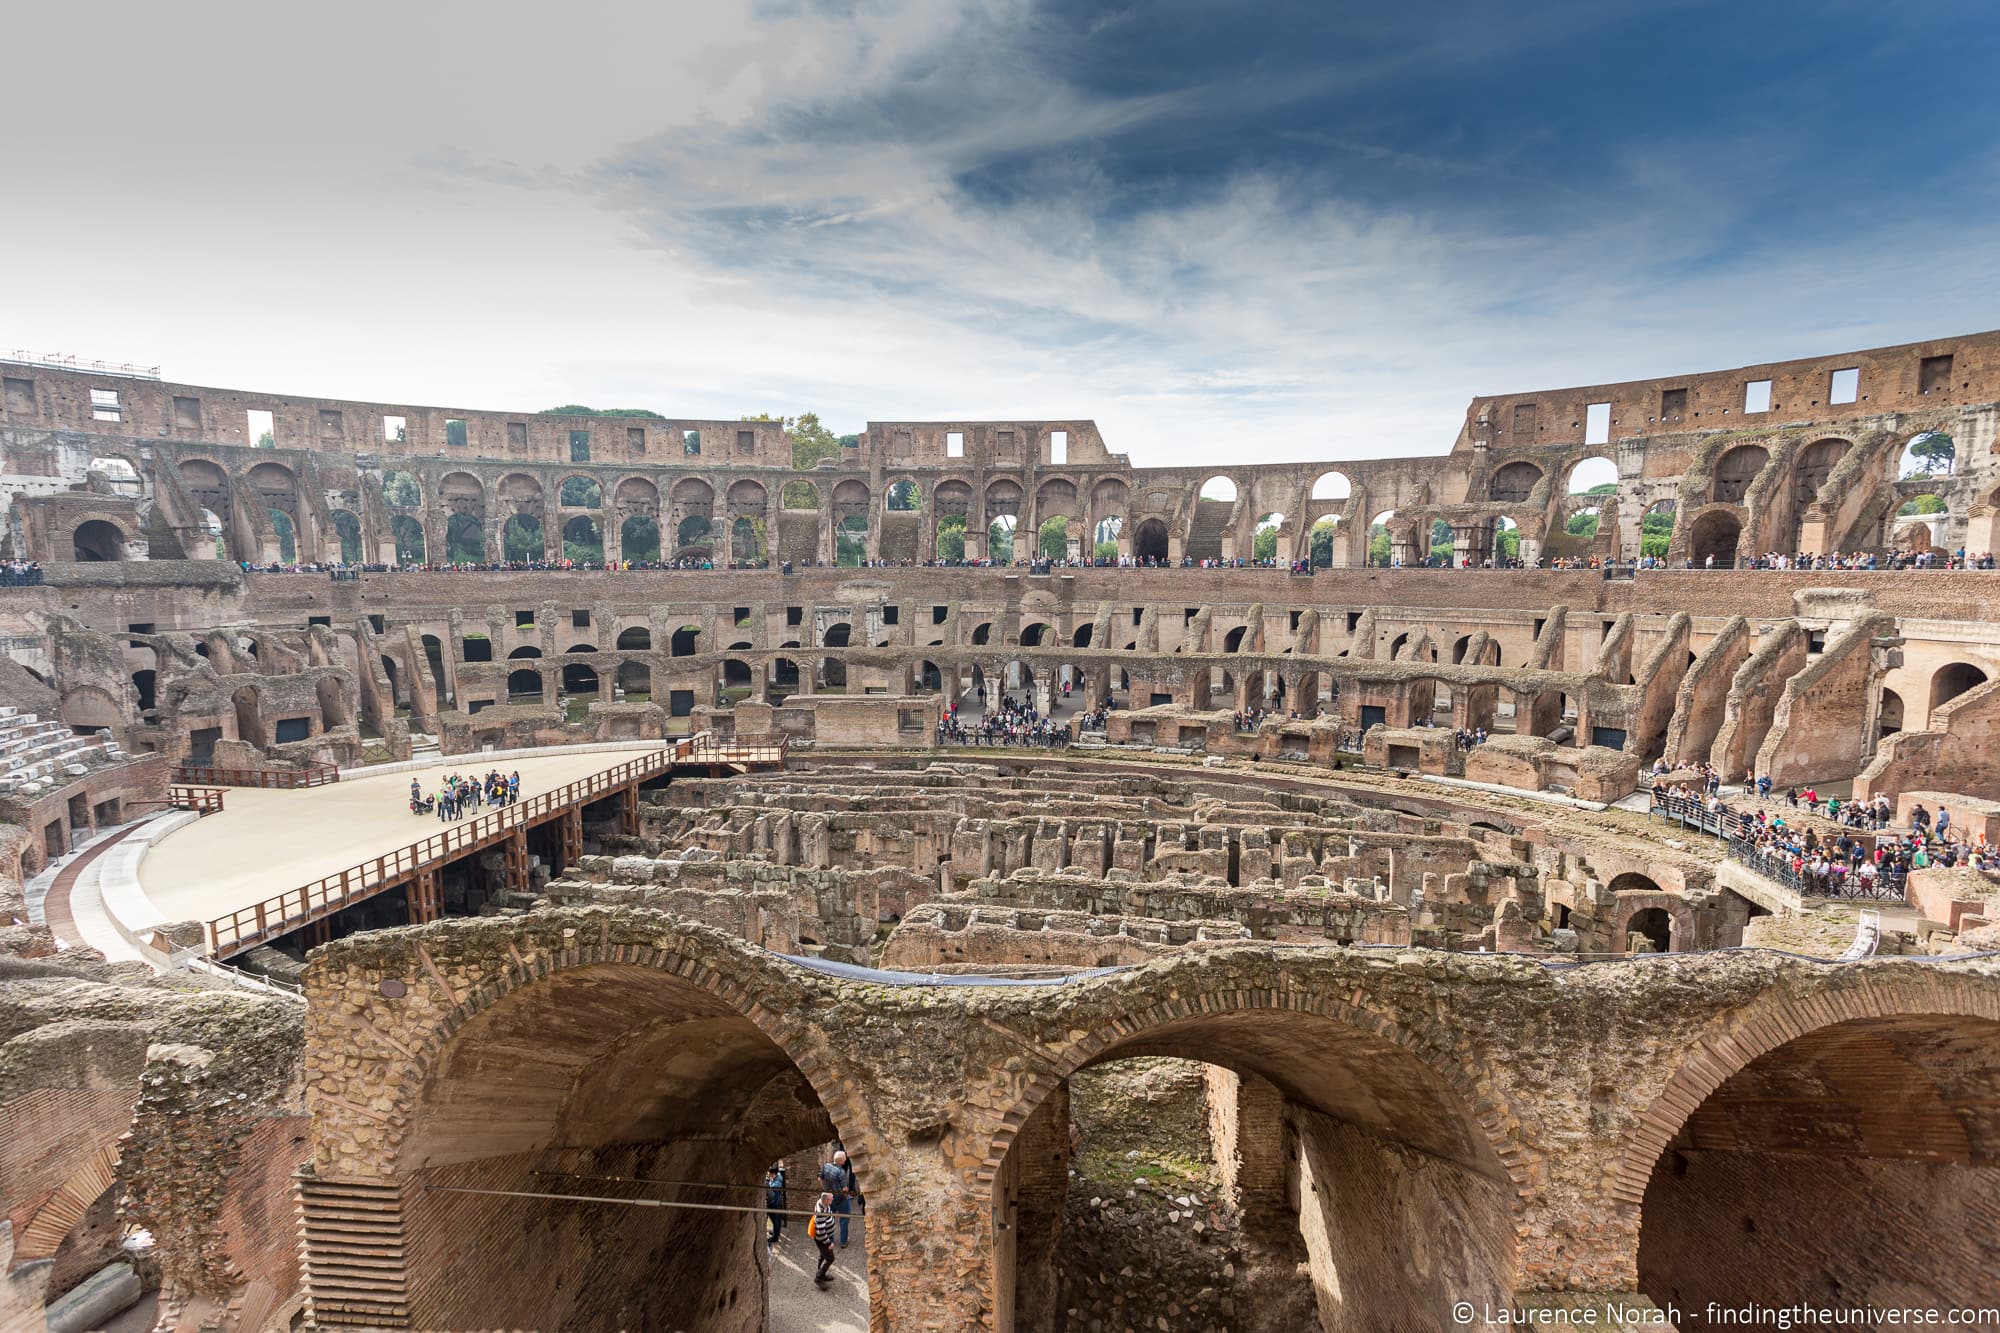 what is underneath the colosseum called